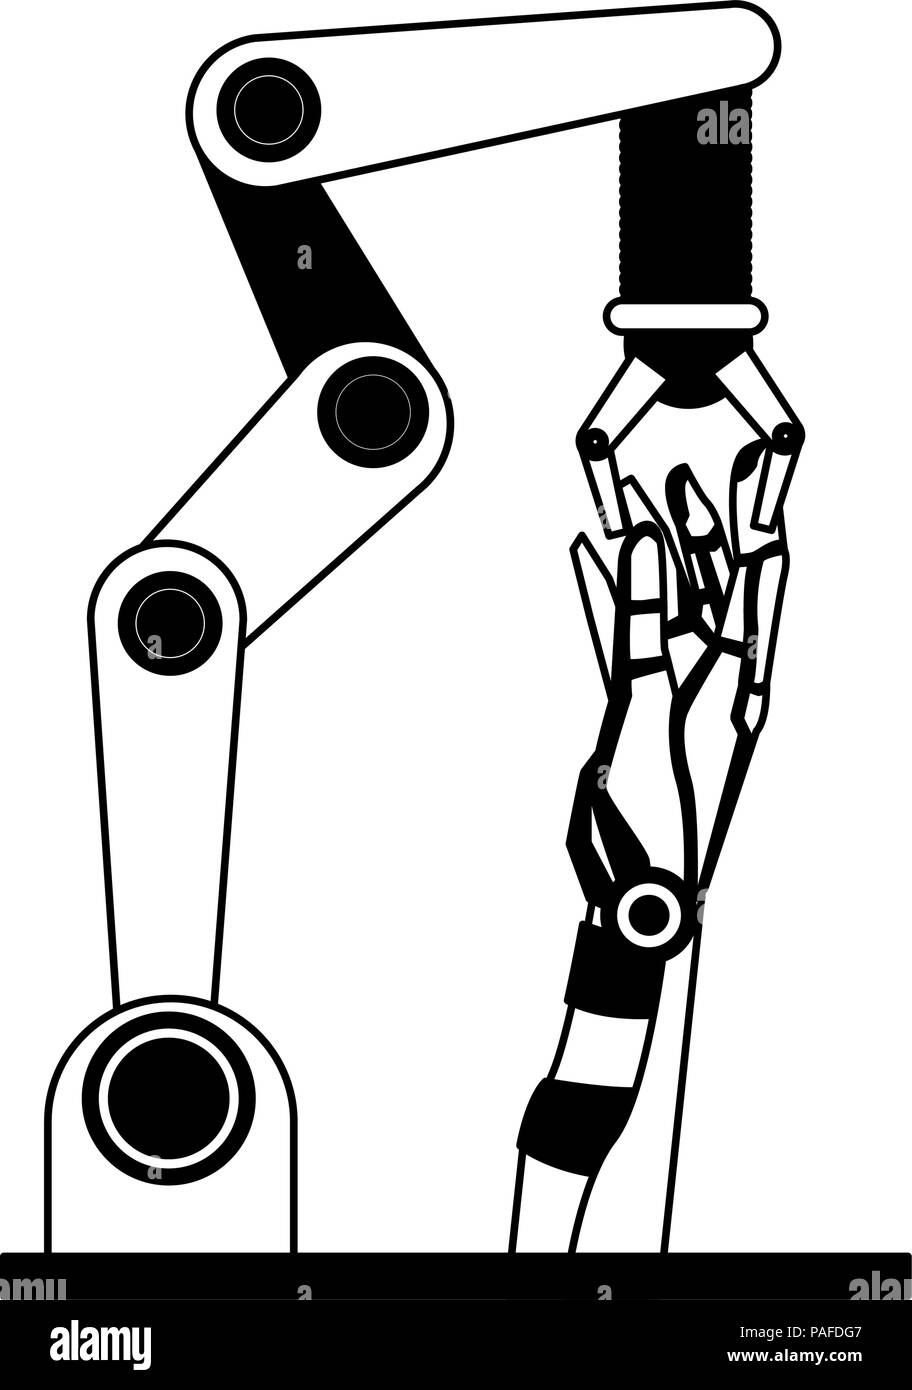 Robot arm and robot hand vector illustration graphic design Stock Vector